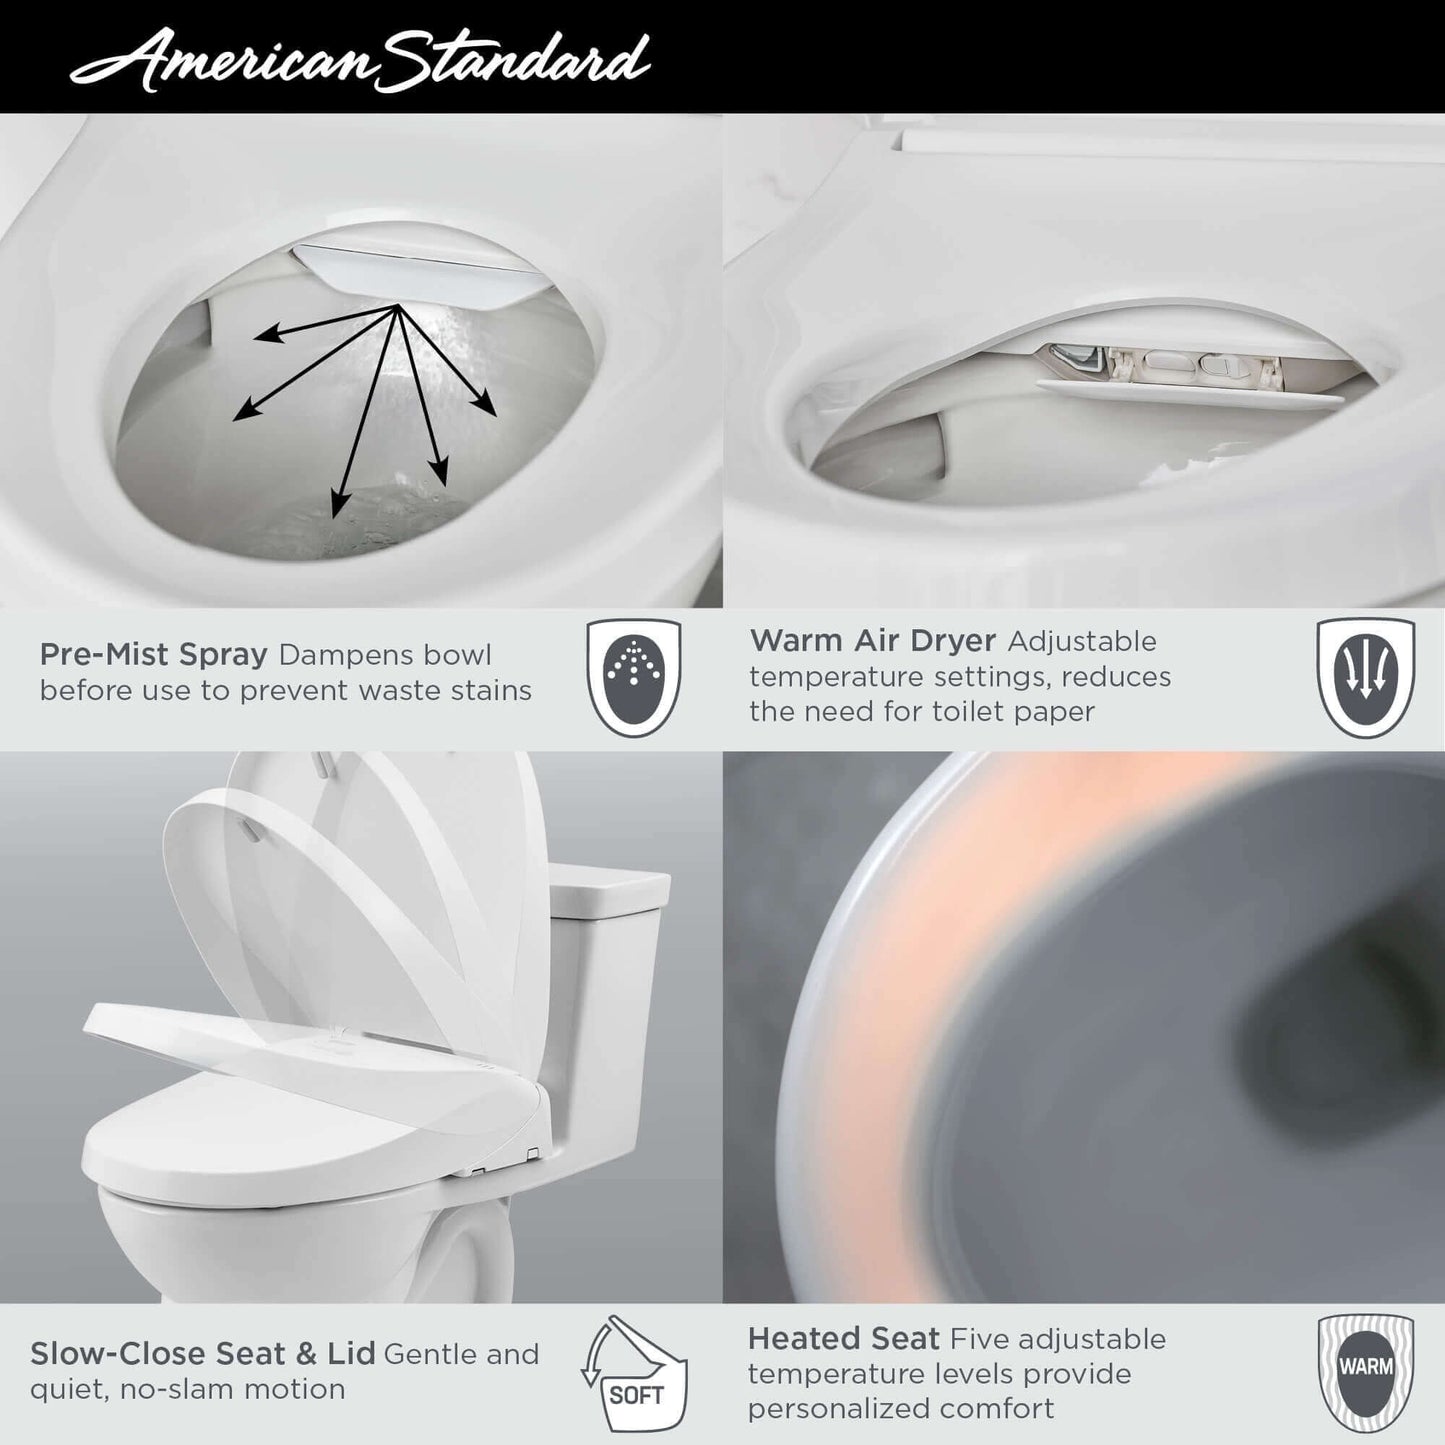 American Standard Advanced Clean 3.0 Electric SpaLet Bidet Toilet Seat With Wireless Remote Control